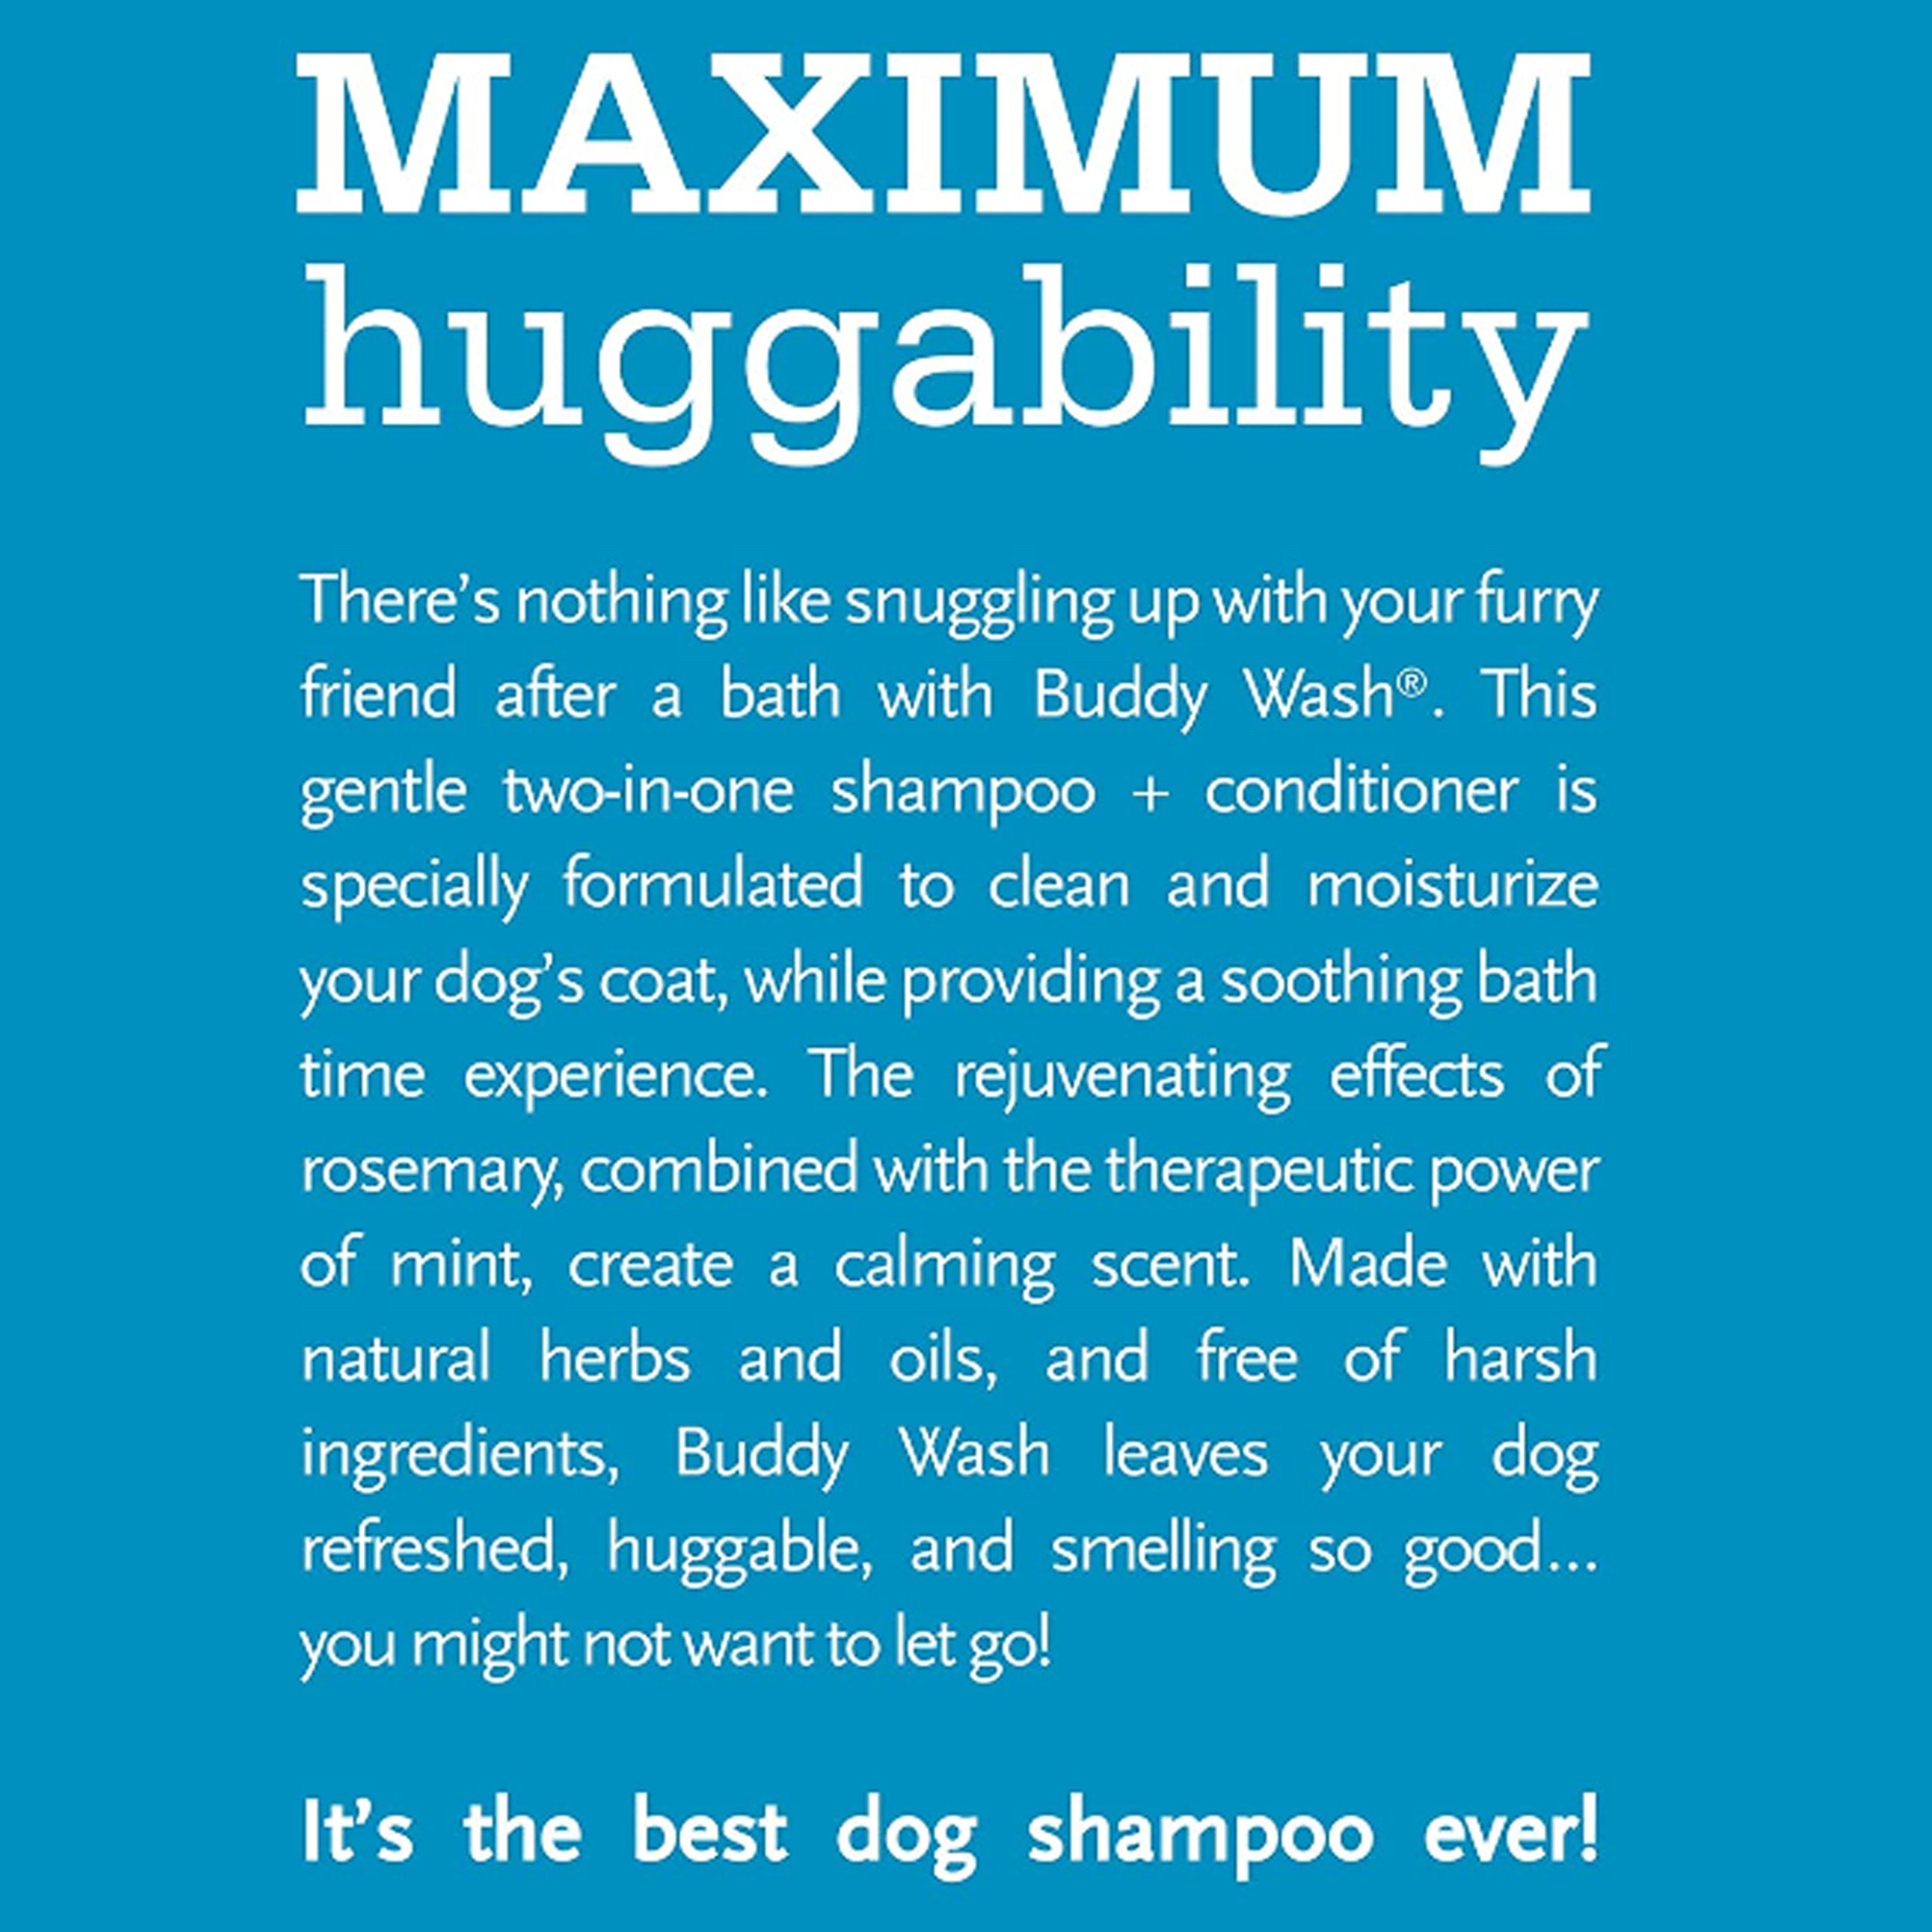 Buddy Wash Rosemary & Mint 2in1 Shampoo and Conditioner 16 fl oz for dogs Fresh and Clean Coat Softener Description Specially Formulated to Clean and Moisturize dogs coat and creates soothing bath experience and calming scent Refreshing feeling maximum huggability 